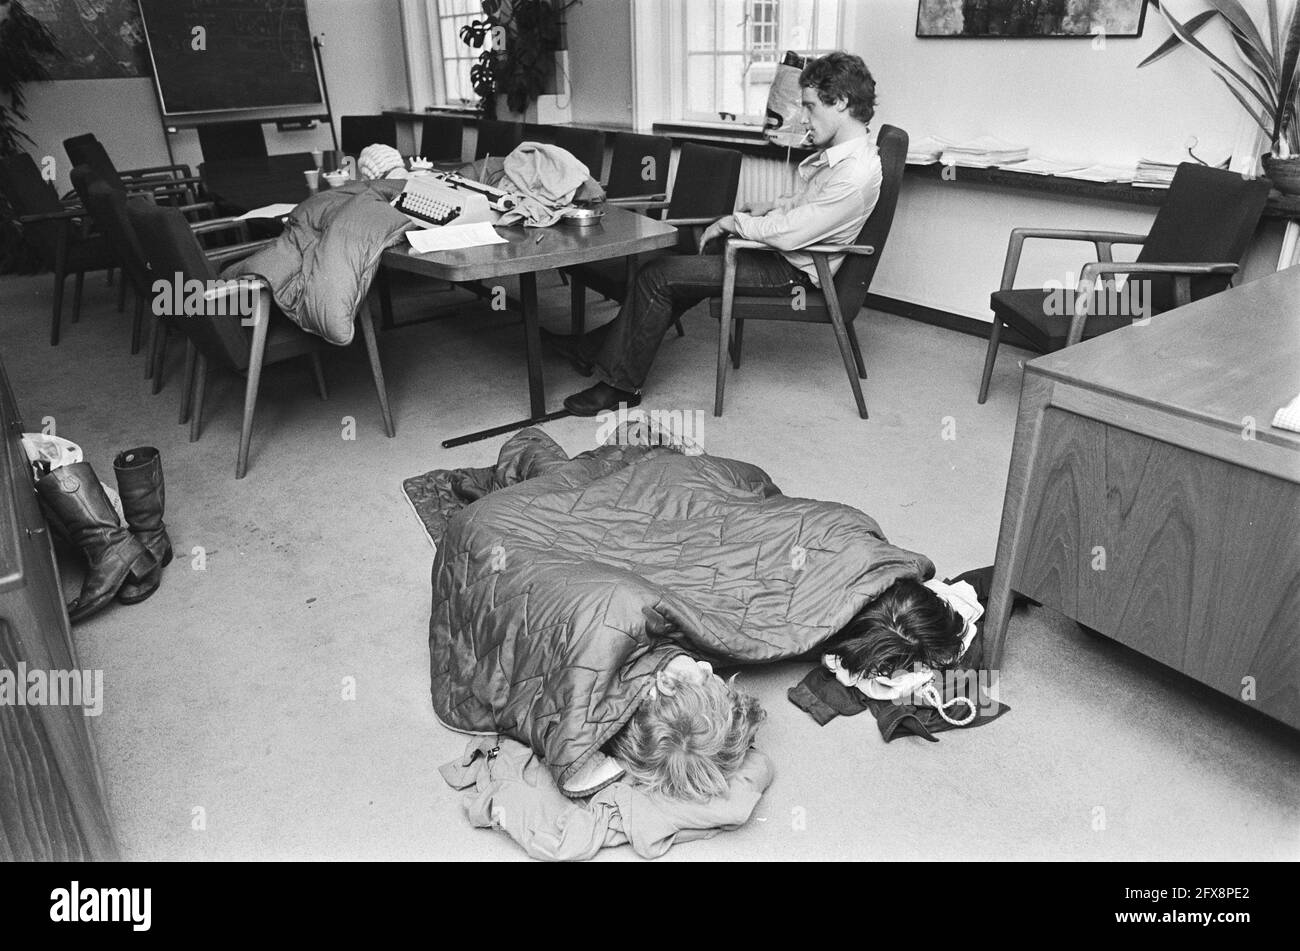 Occupation Maagdenhuis as a protest against the erosion of participation in departments; occupiers in sleeping bags, November 22, 1978, Occupation, protests, sleeping bags, The Netherlands, 20th century press agency photo, news to remember, documentary, historic photography 1945-1990, visual stories, human history of the Twentieth Century, capturing moments in time Stock Photo